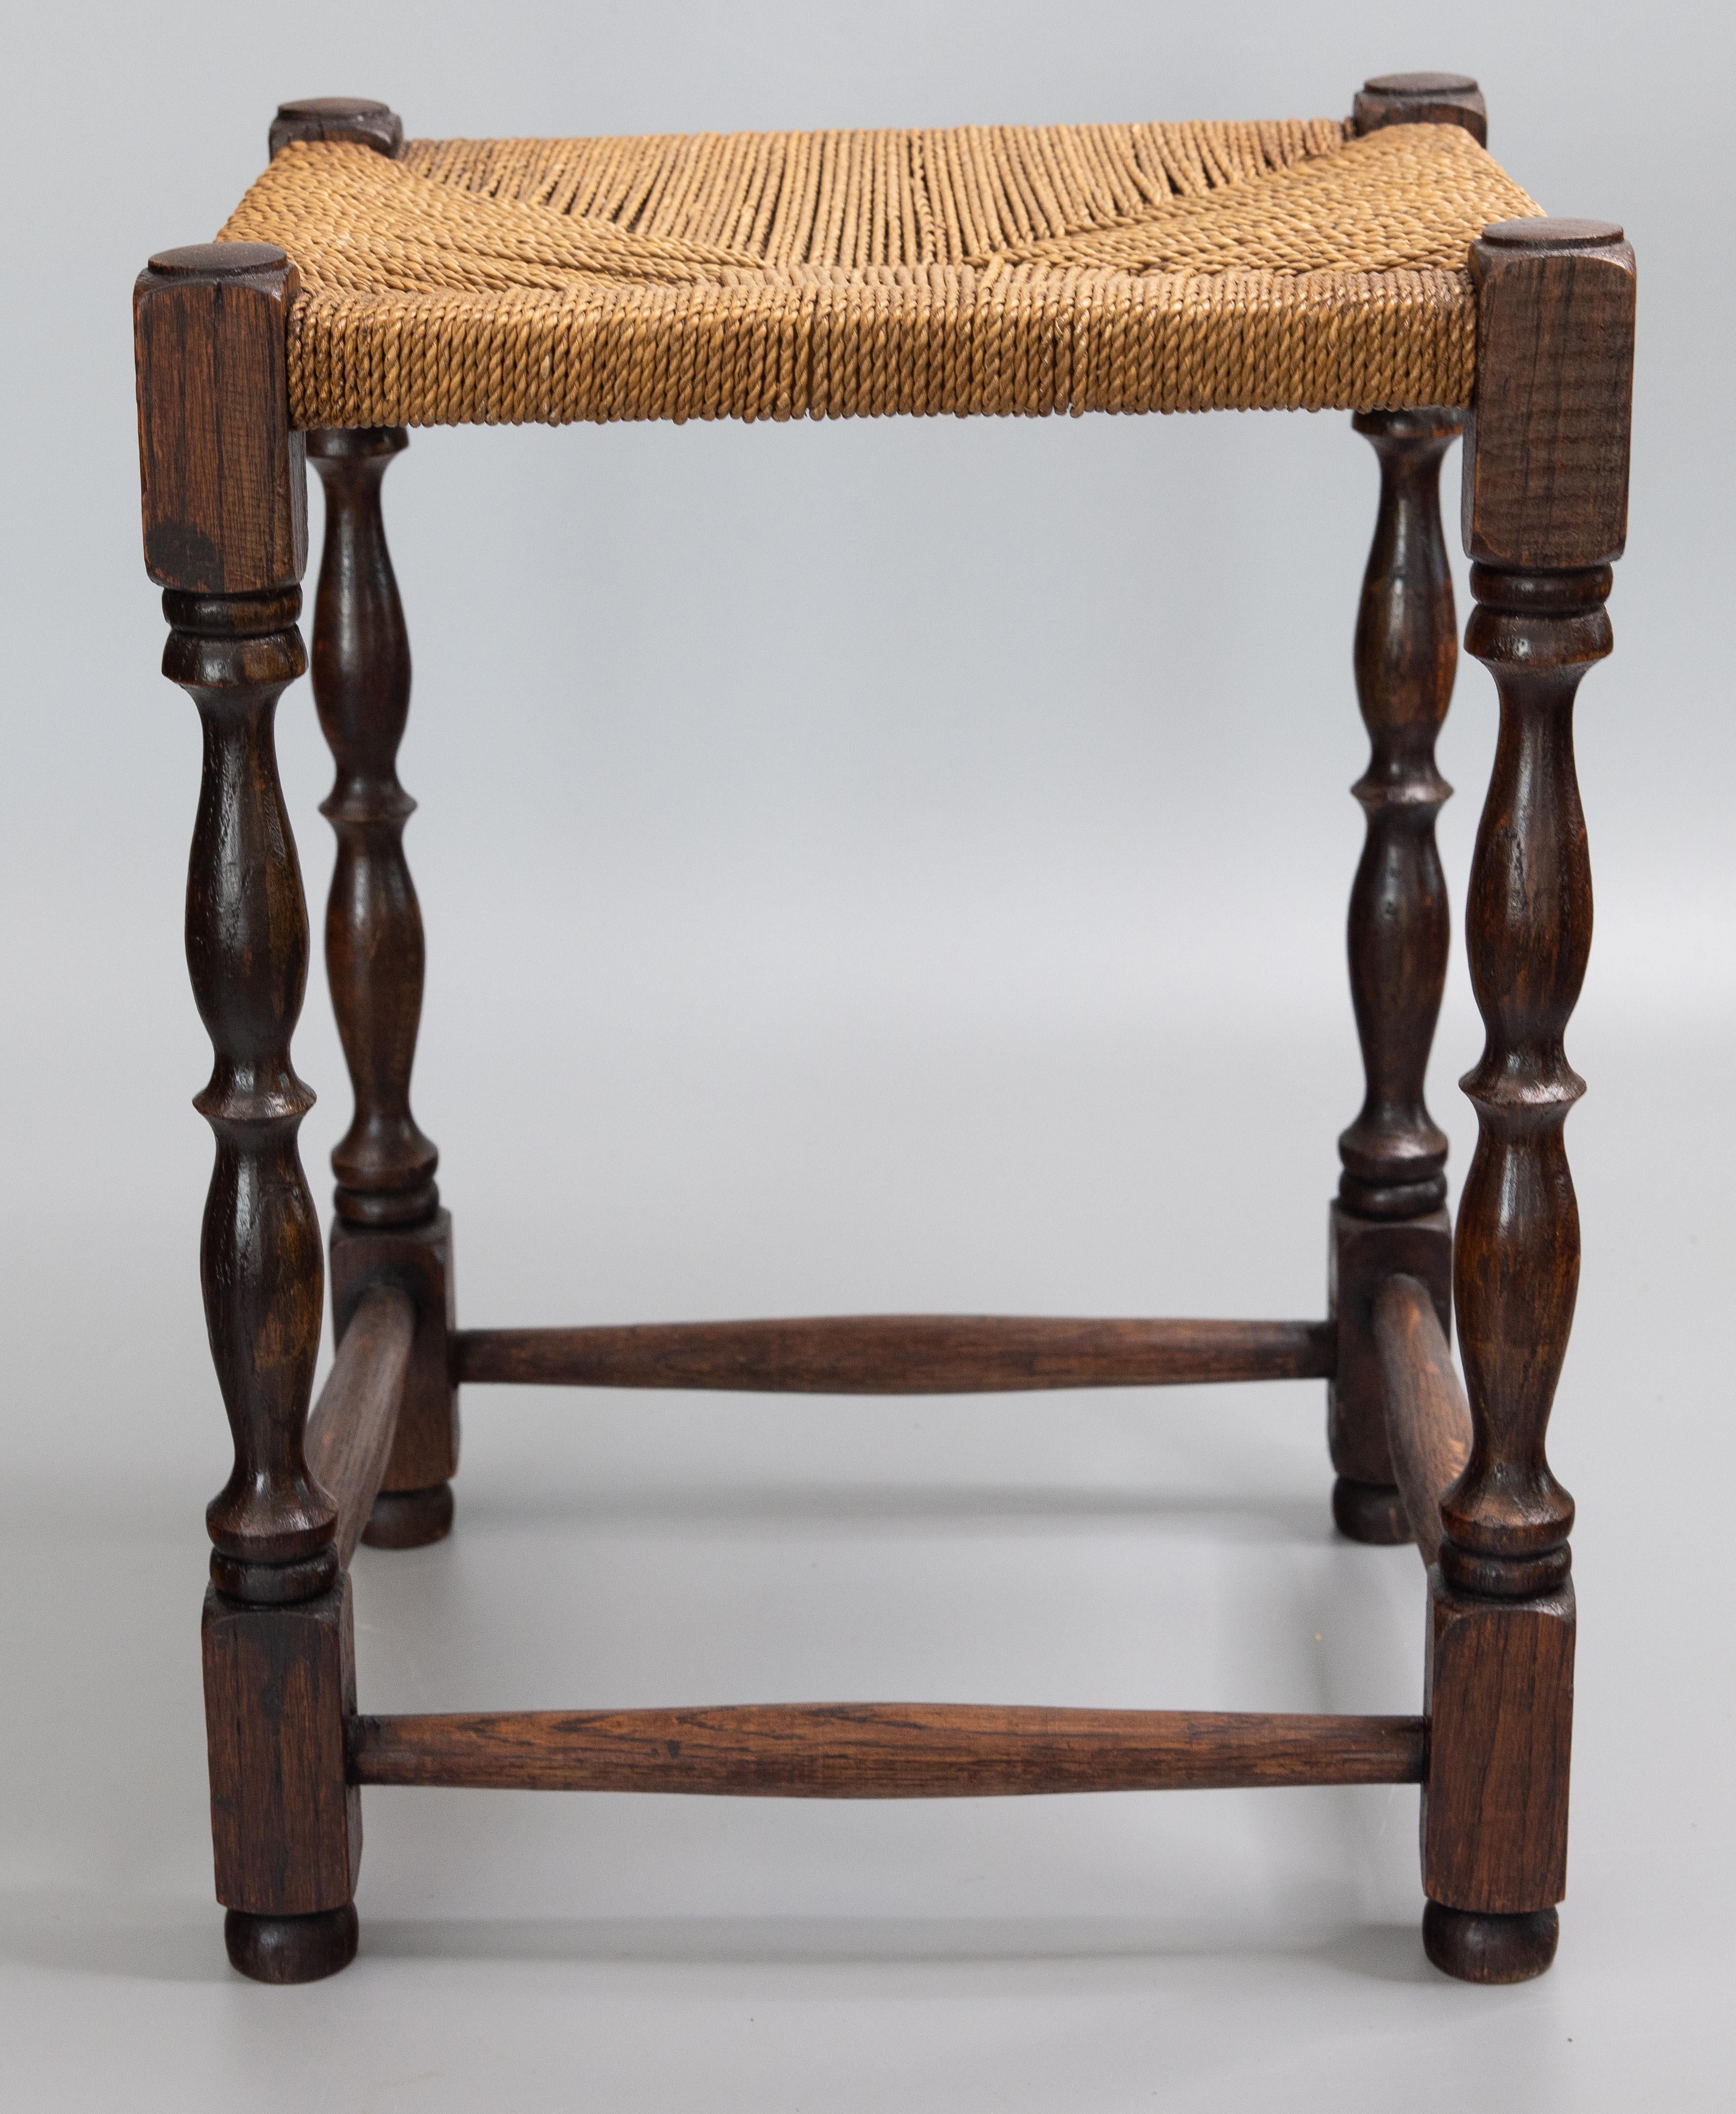 Hand-Woven Antique English Oak Woven Cord Rope Stool Footstool, circa 1900 For Sale